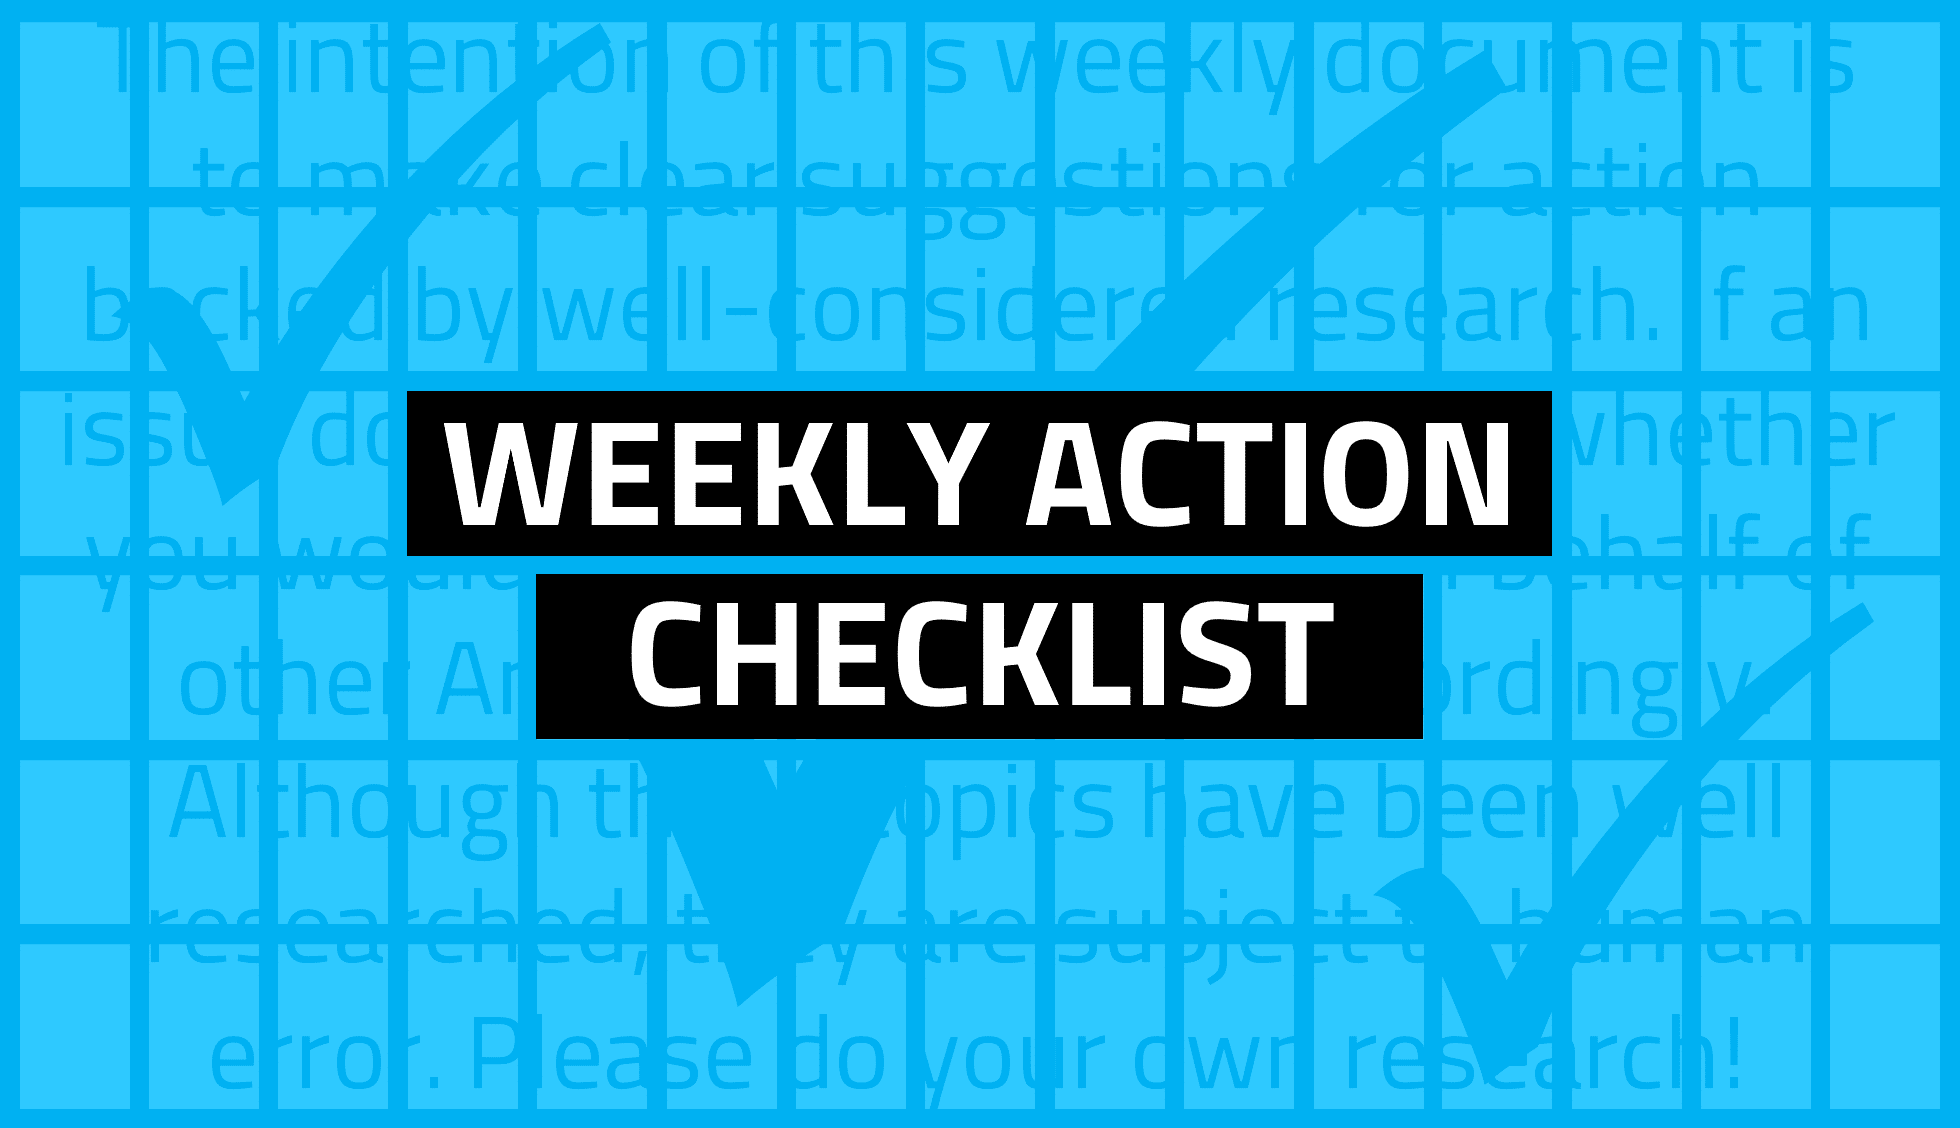 What to Do This Week of March 26, 2017